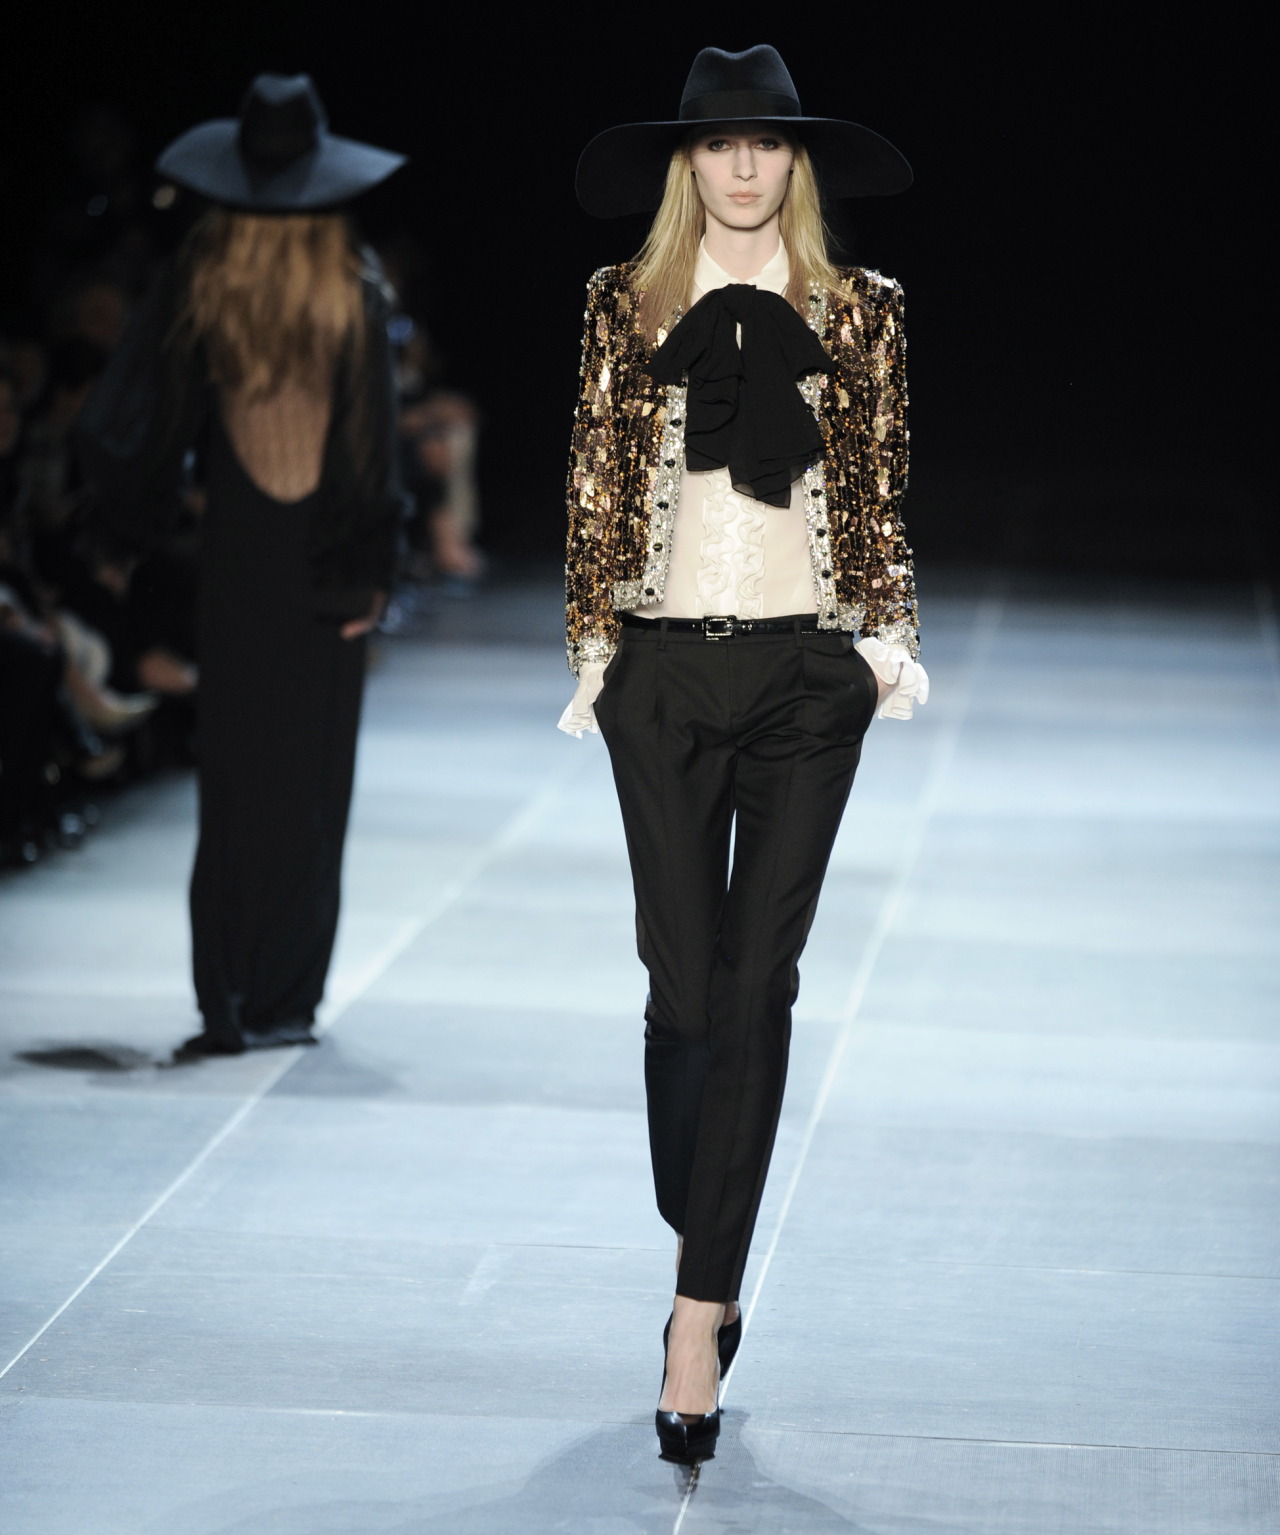 We Can’t Wait to Meet SAINT LAURENT “COLLECTION I”... | The STYLE INSIGHT